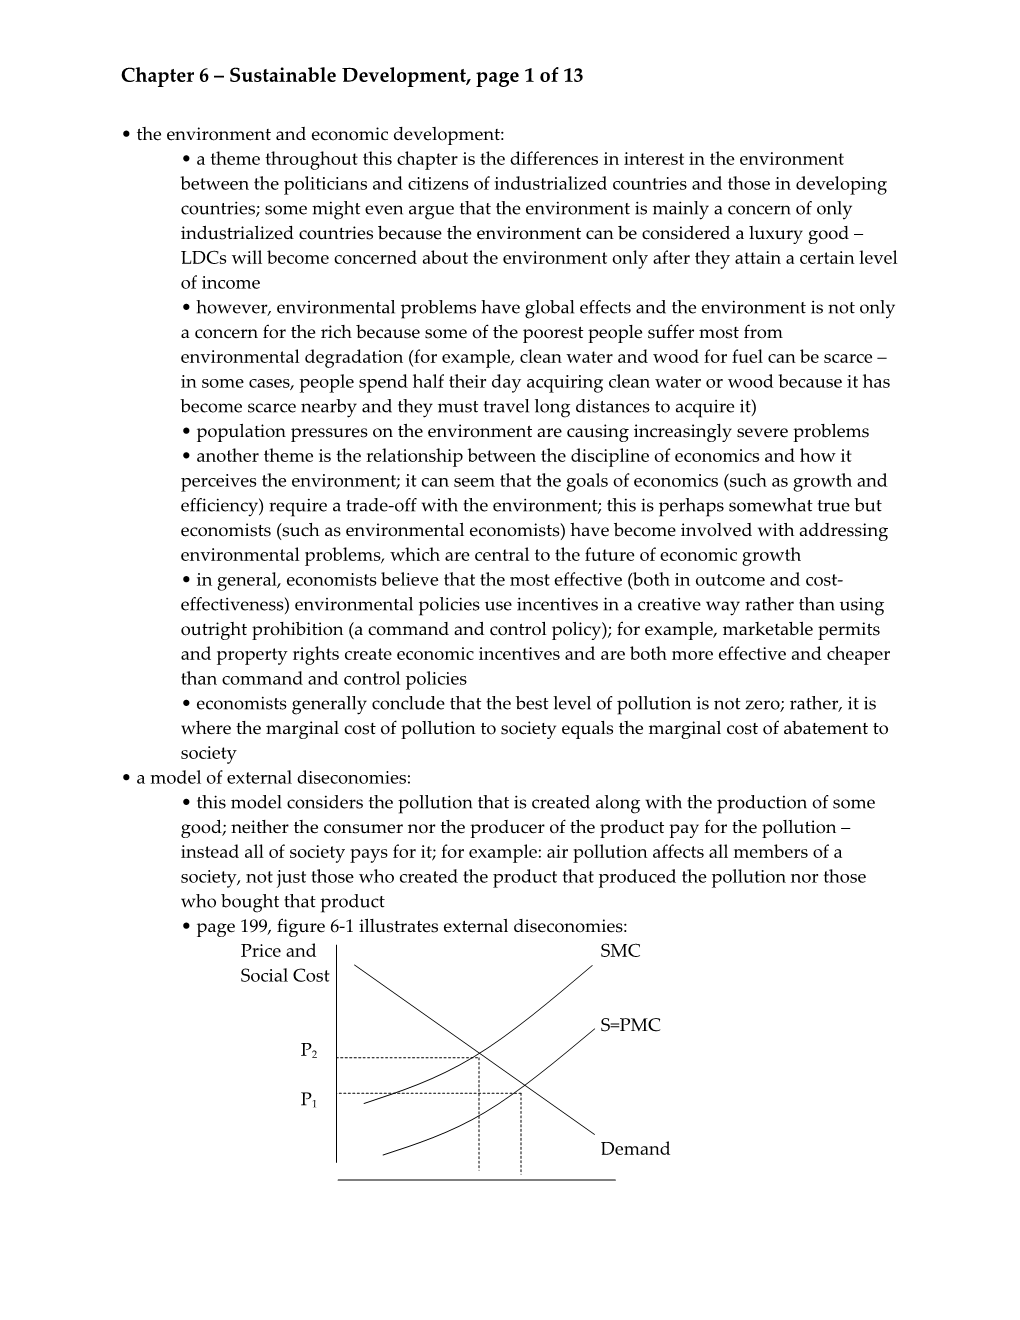 Chapter 6 Sustainable Development, Page 1 of 13